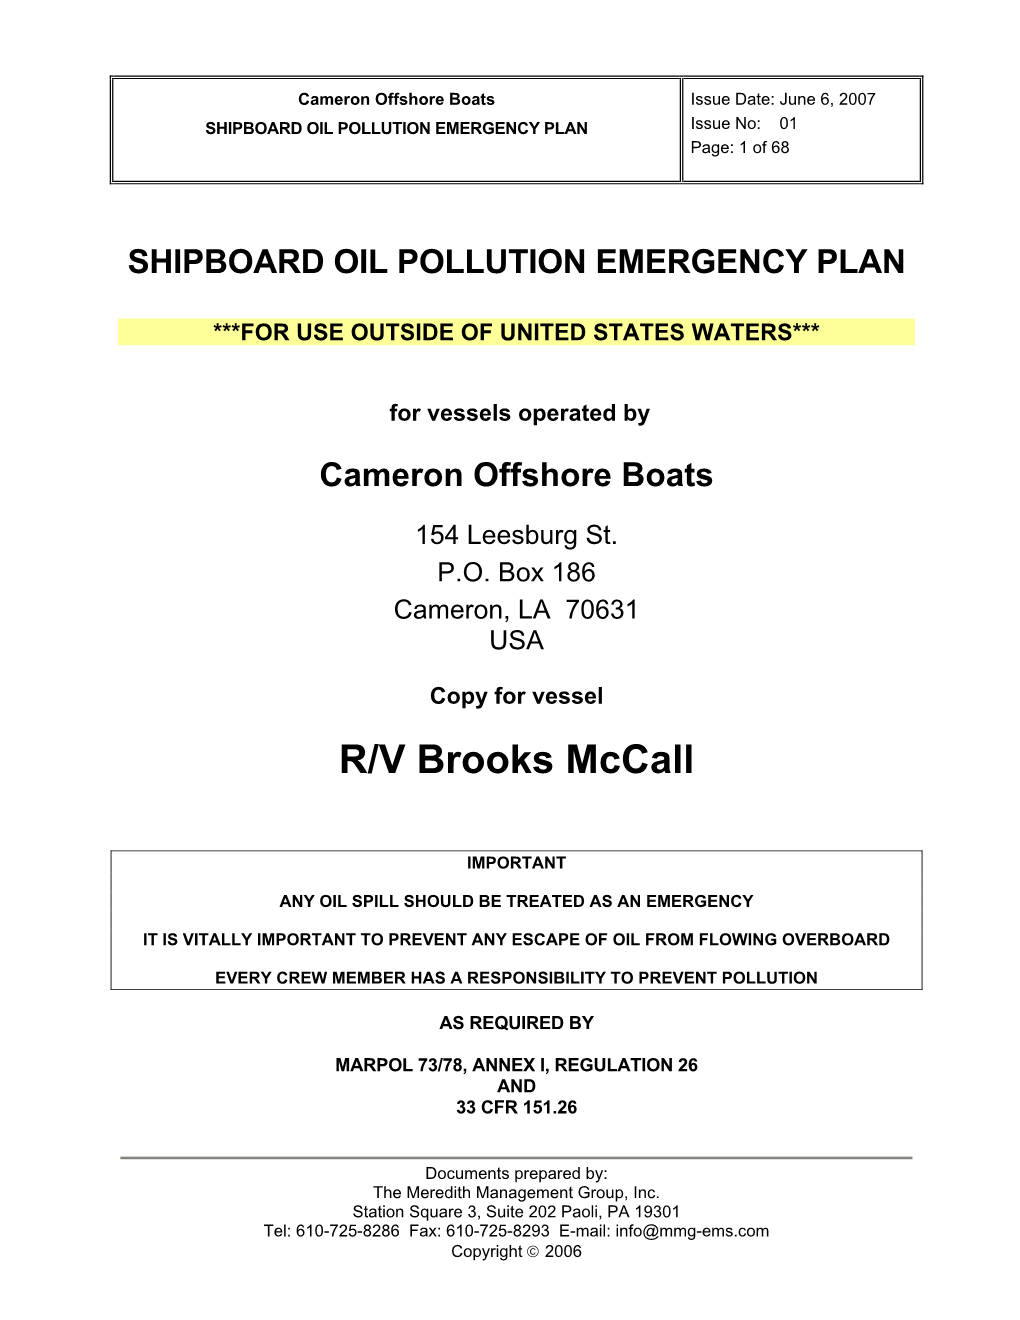 SHIPBOARD OIL POLLUTION EMERGENCY PLAN Issue No: 01 Page: 1 of 68